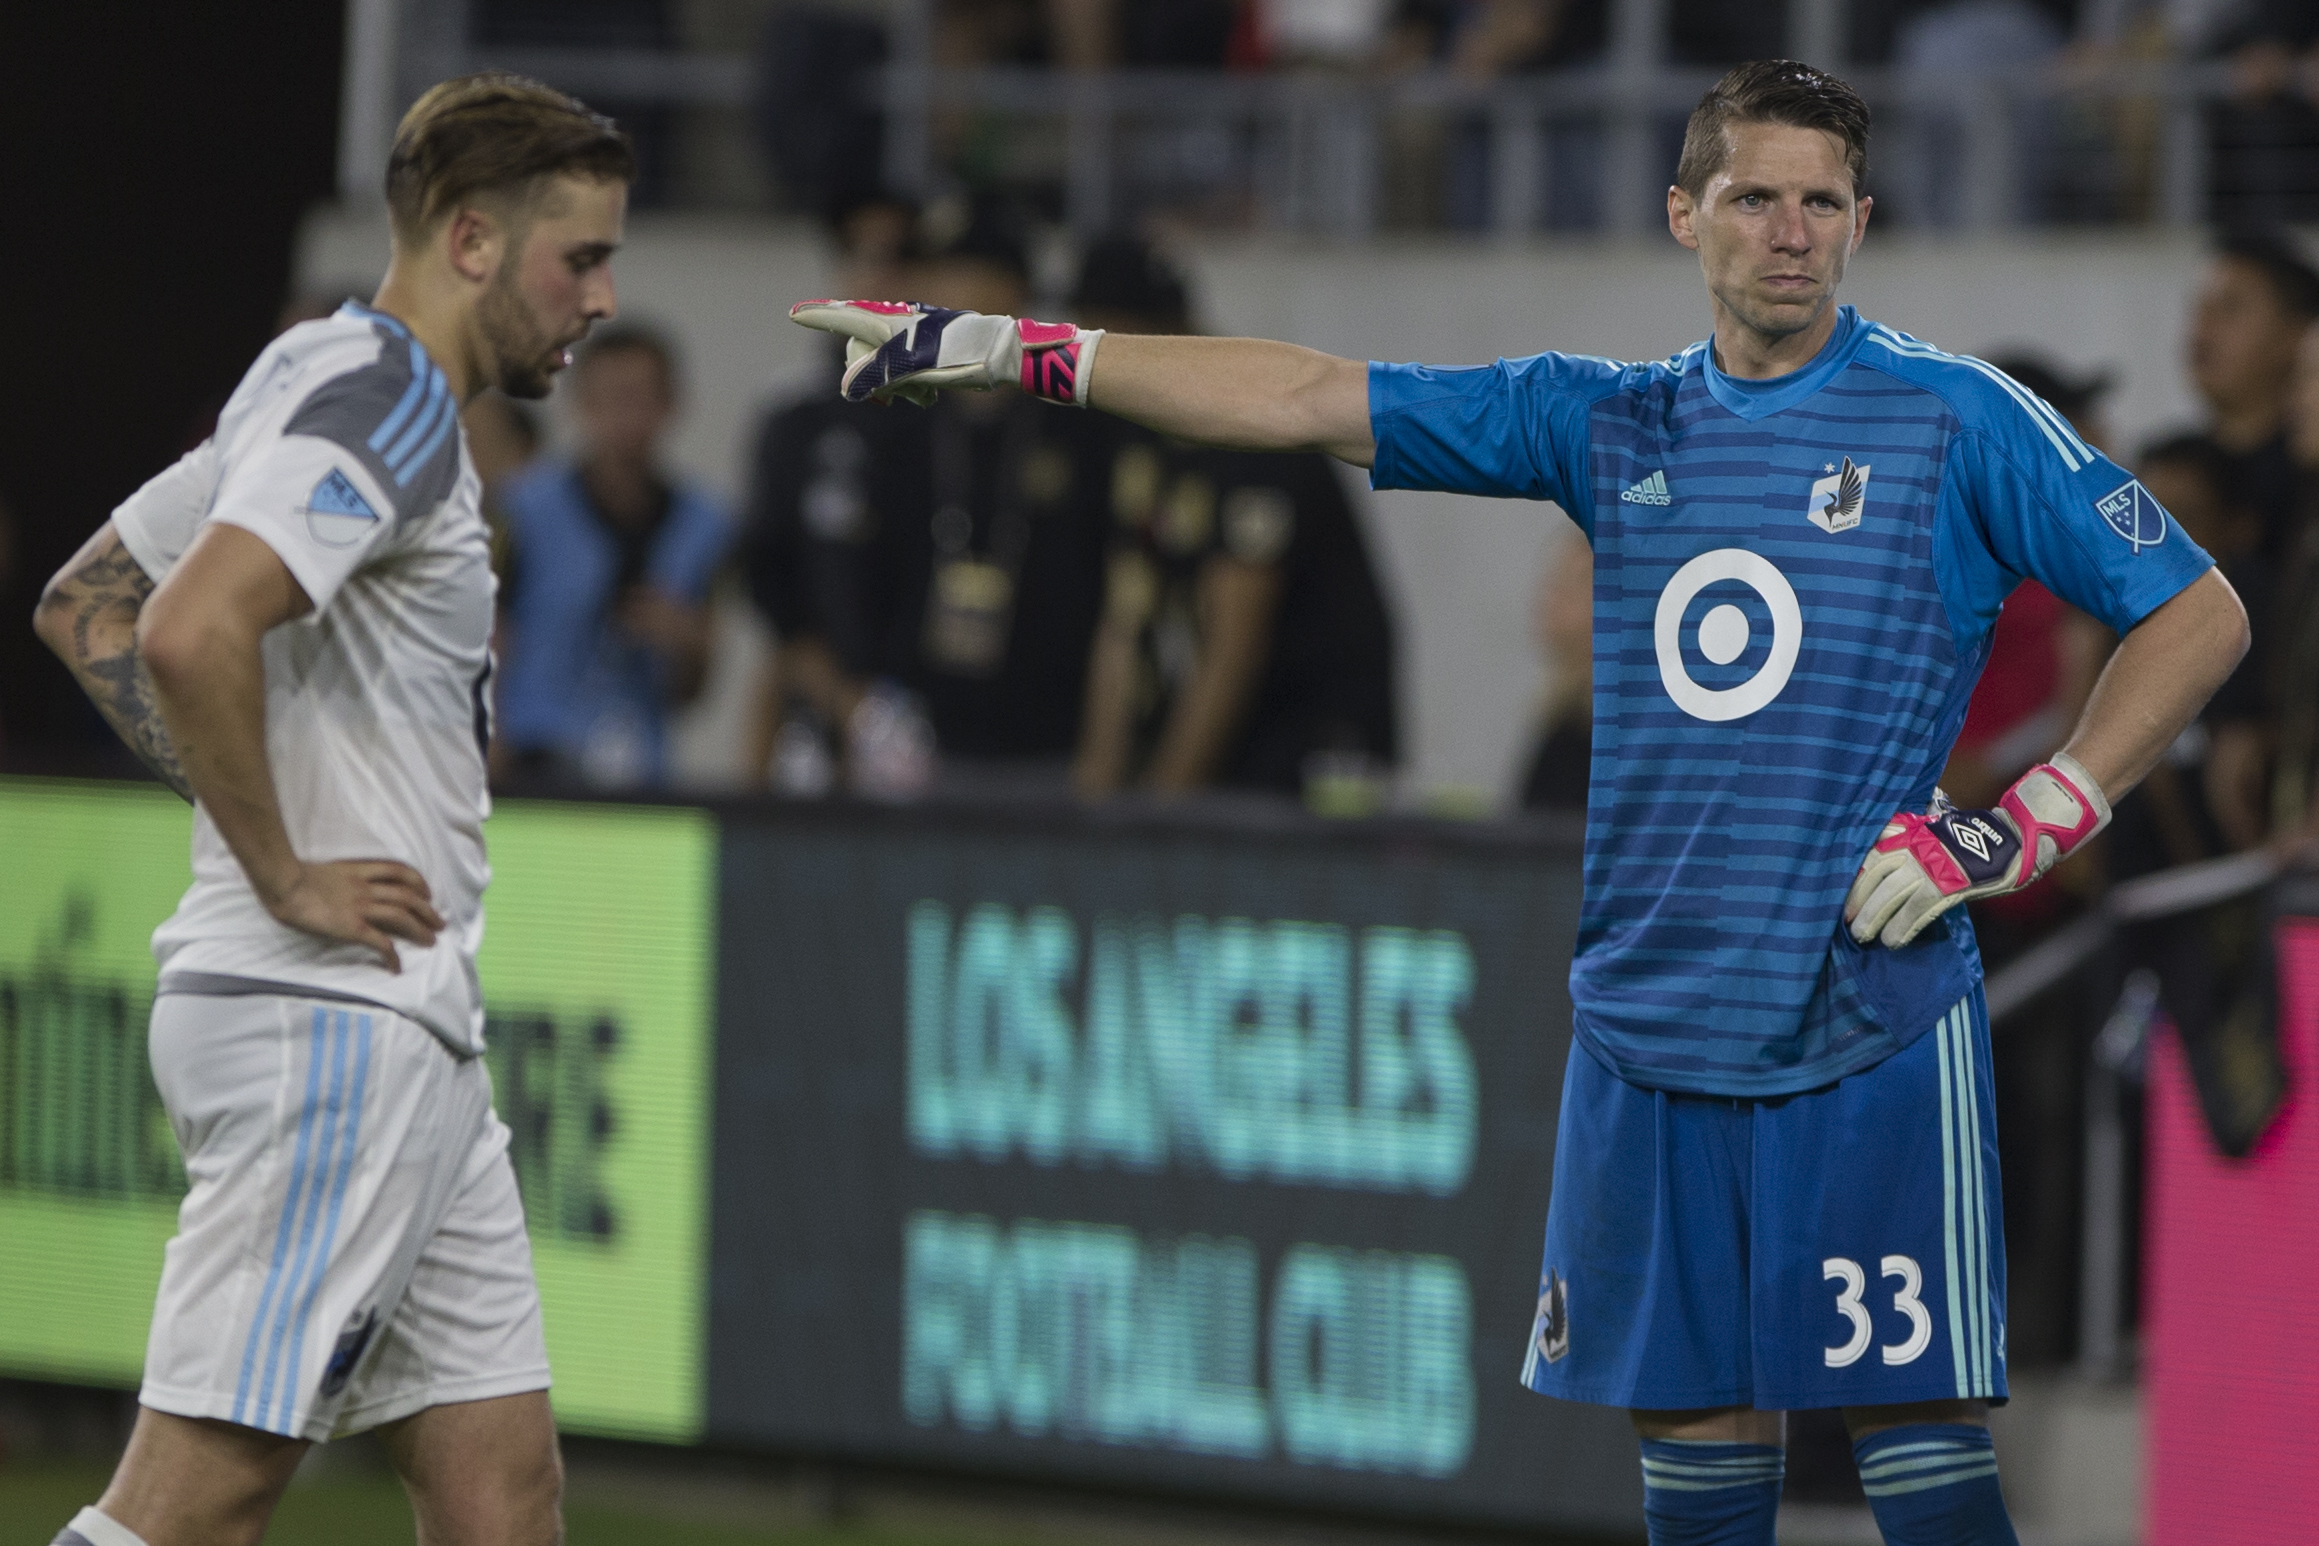  Minnesota United Football Club goalie Booby Shuttleworth (33, right) blames his teammates for a lack of defense during their match against the Los Angeles Football Club  at Banc of California Stadium on May 9, 2018 where the LAFC won 2-0. (Zane Meye